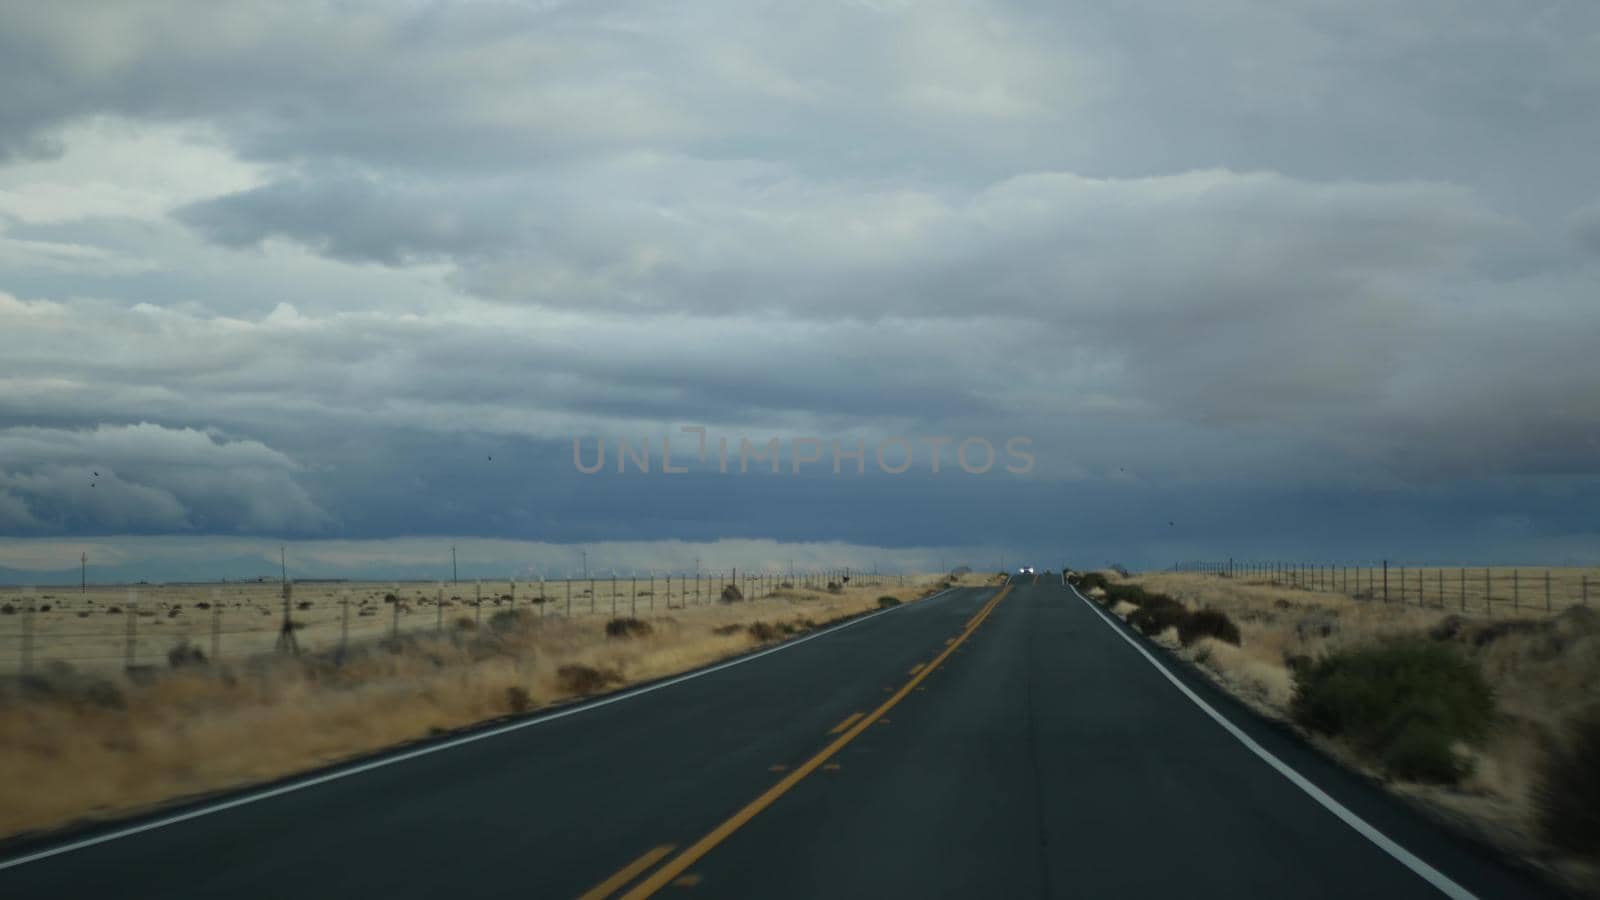 Driving auto, road trip in California, USA, view from car. Hitchhiking traveling in United States. Highway, mountains and cloudy dramatic sky before rain storm. American scenic byway. Passenger POV by DogoraSun